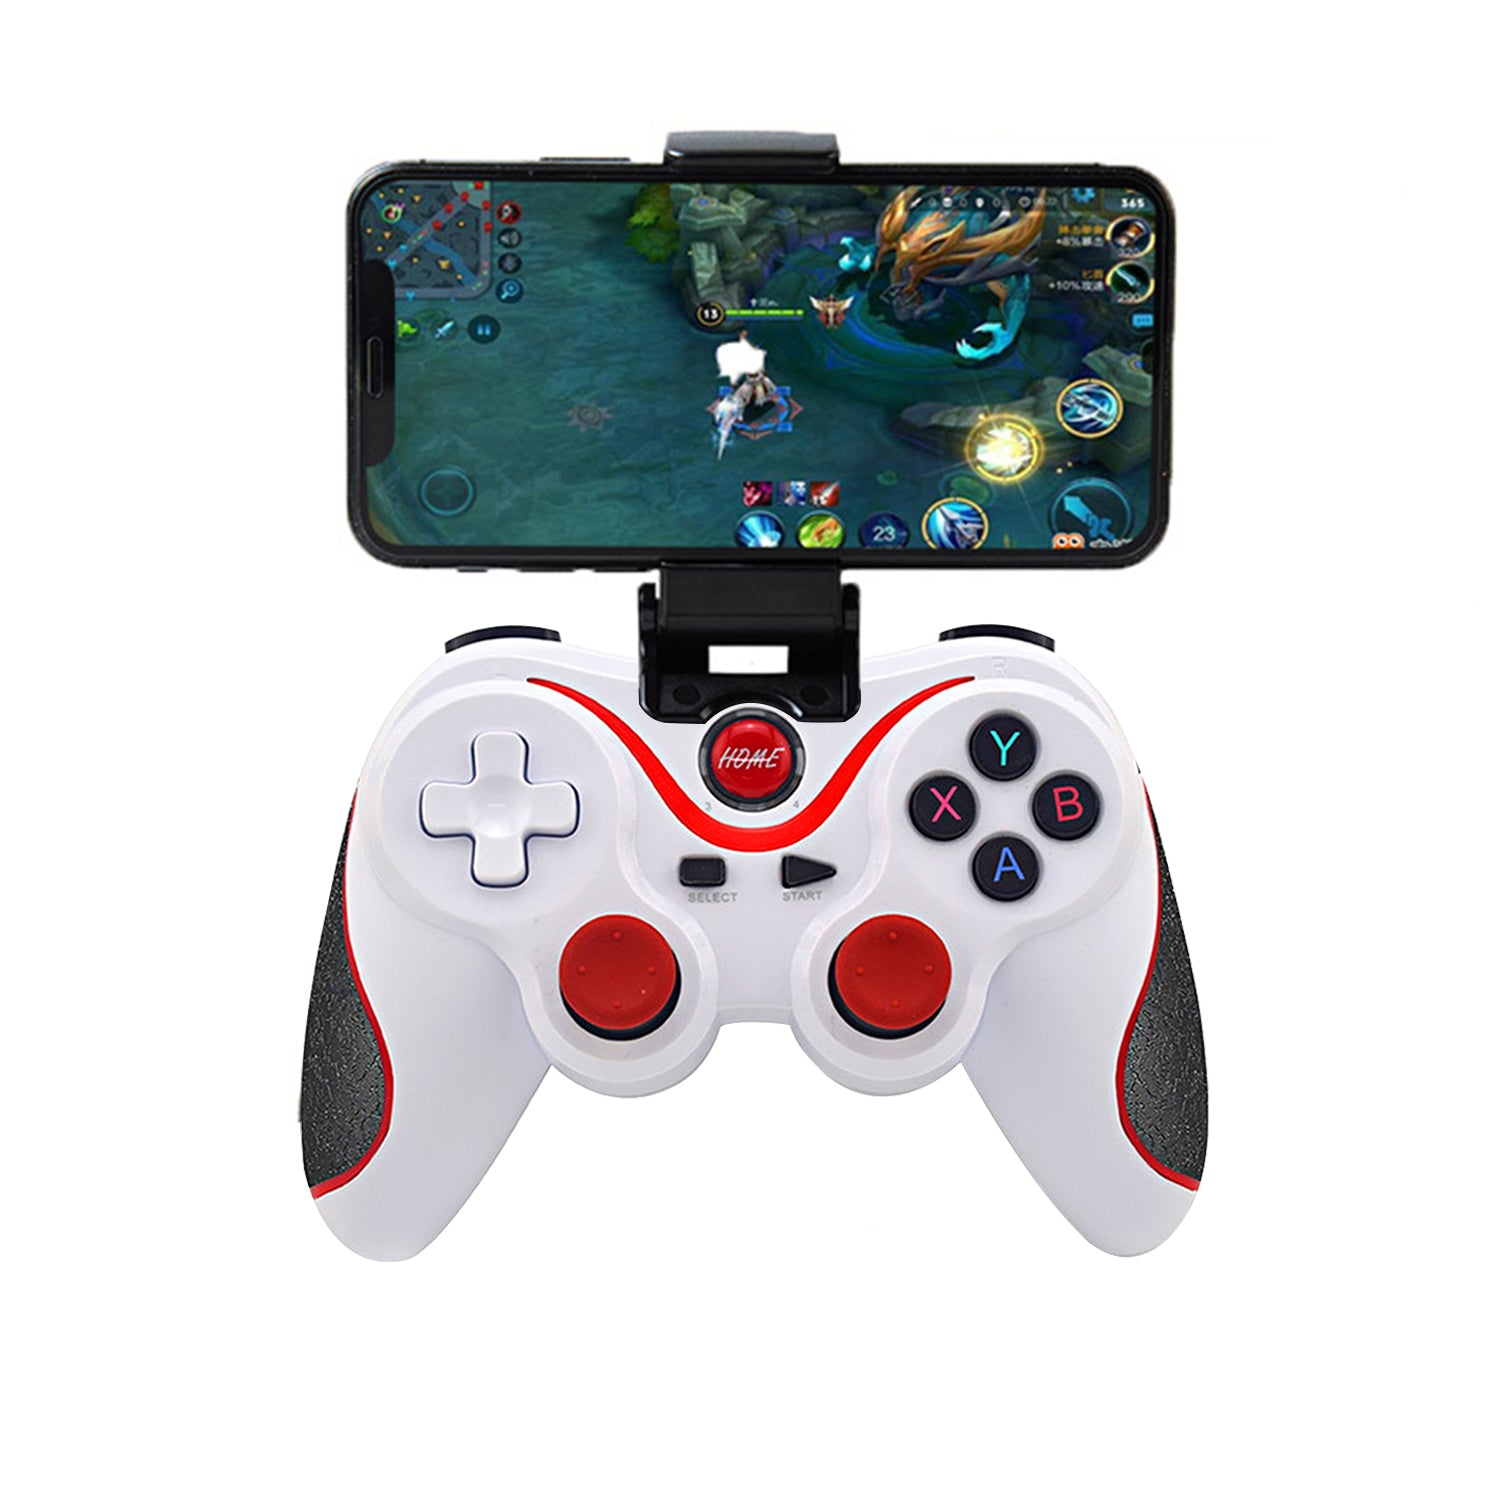 Wireless Bluetooth mobile phone holder receiver game handle